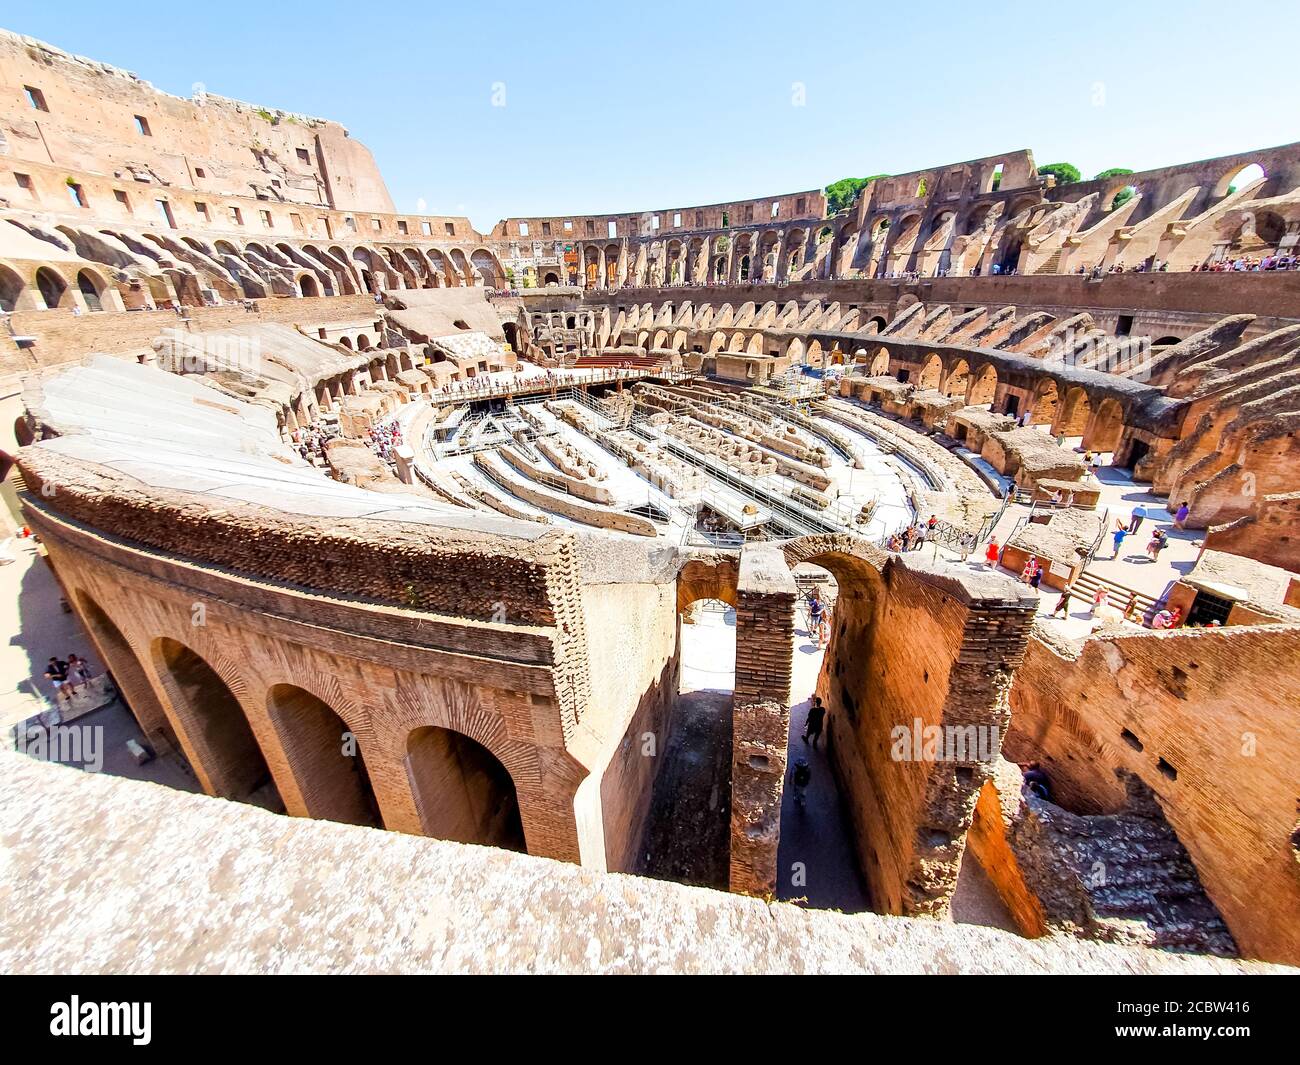 The view of the arena in the Colosseum Stock Photo